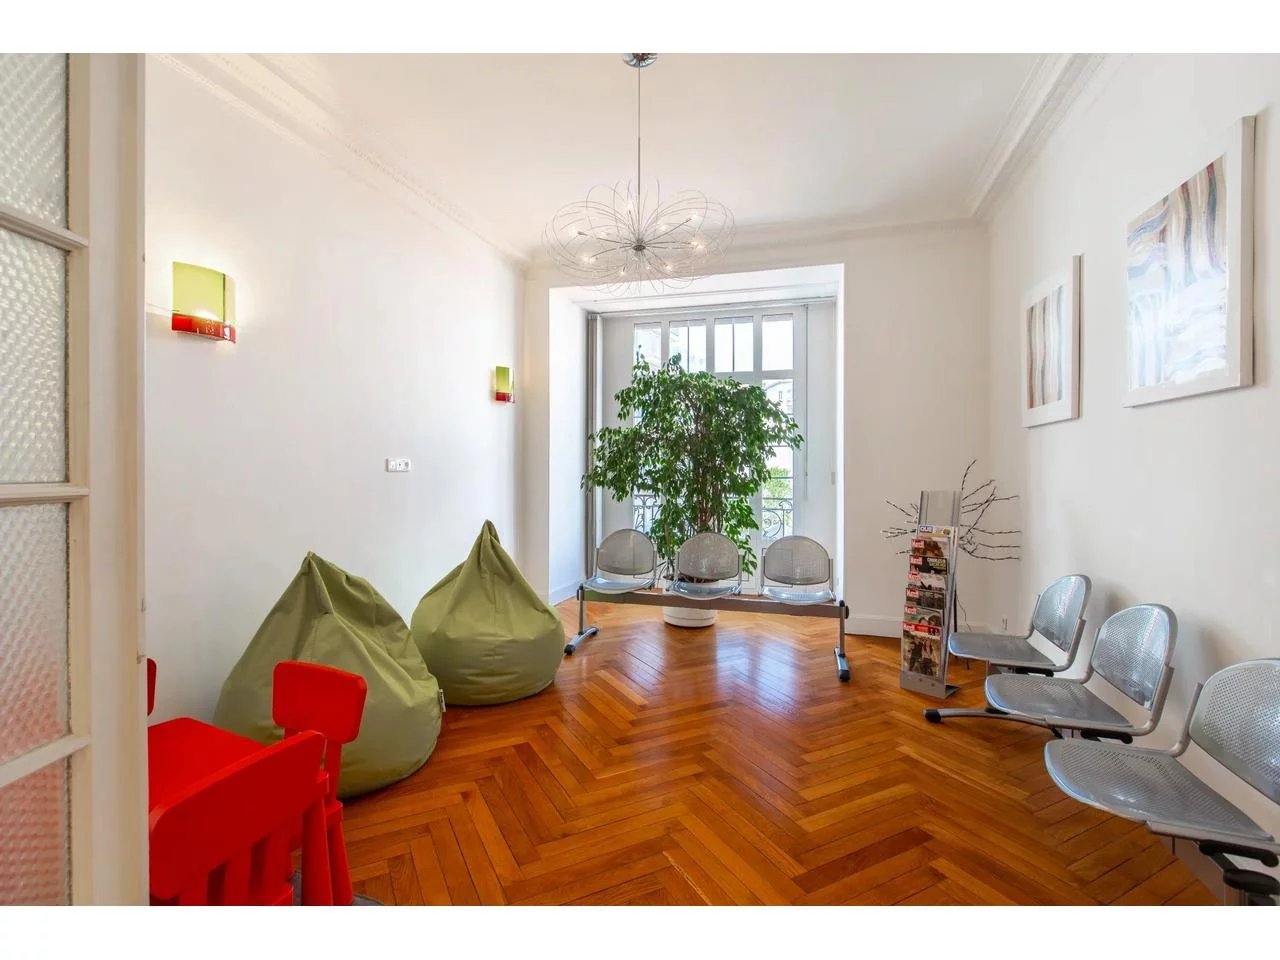 Appartement  6 Rooms 154m2  for sale  1 120 000 €